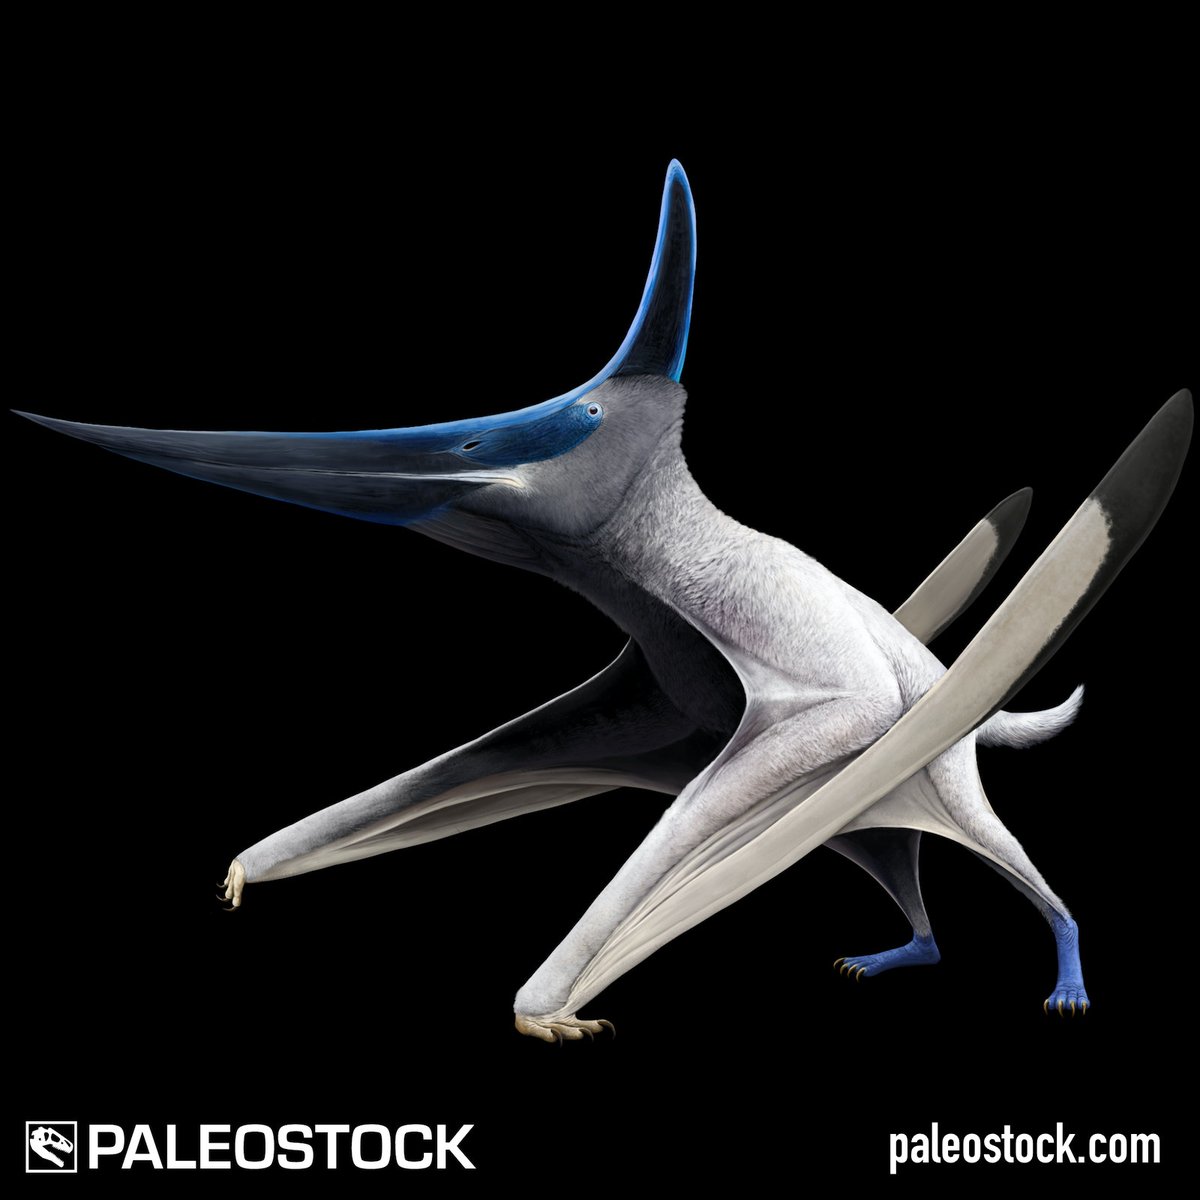 Volgadraco was a pterodactyloid pterosaur from the Cretaceous of Russia.

License this stock resource at: paleostock.com/resource/volga…

Illustration by Joshua Tedder

#paleontology #paleoart